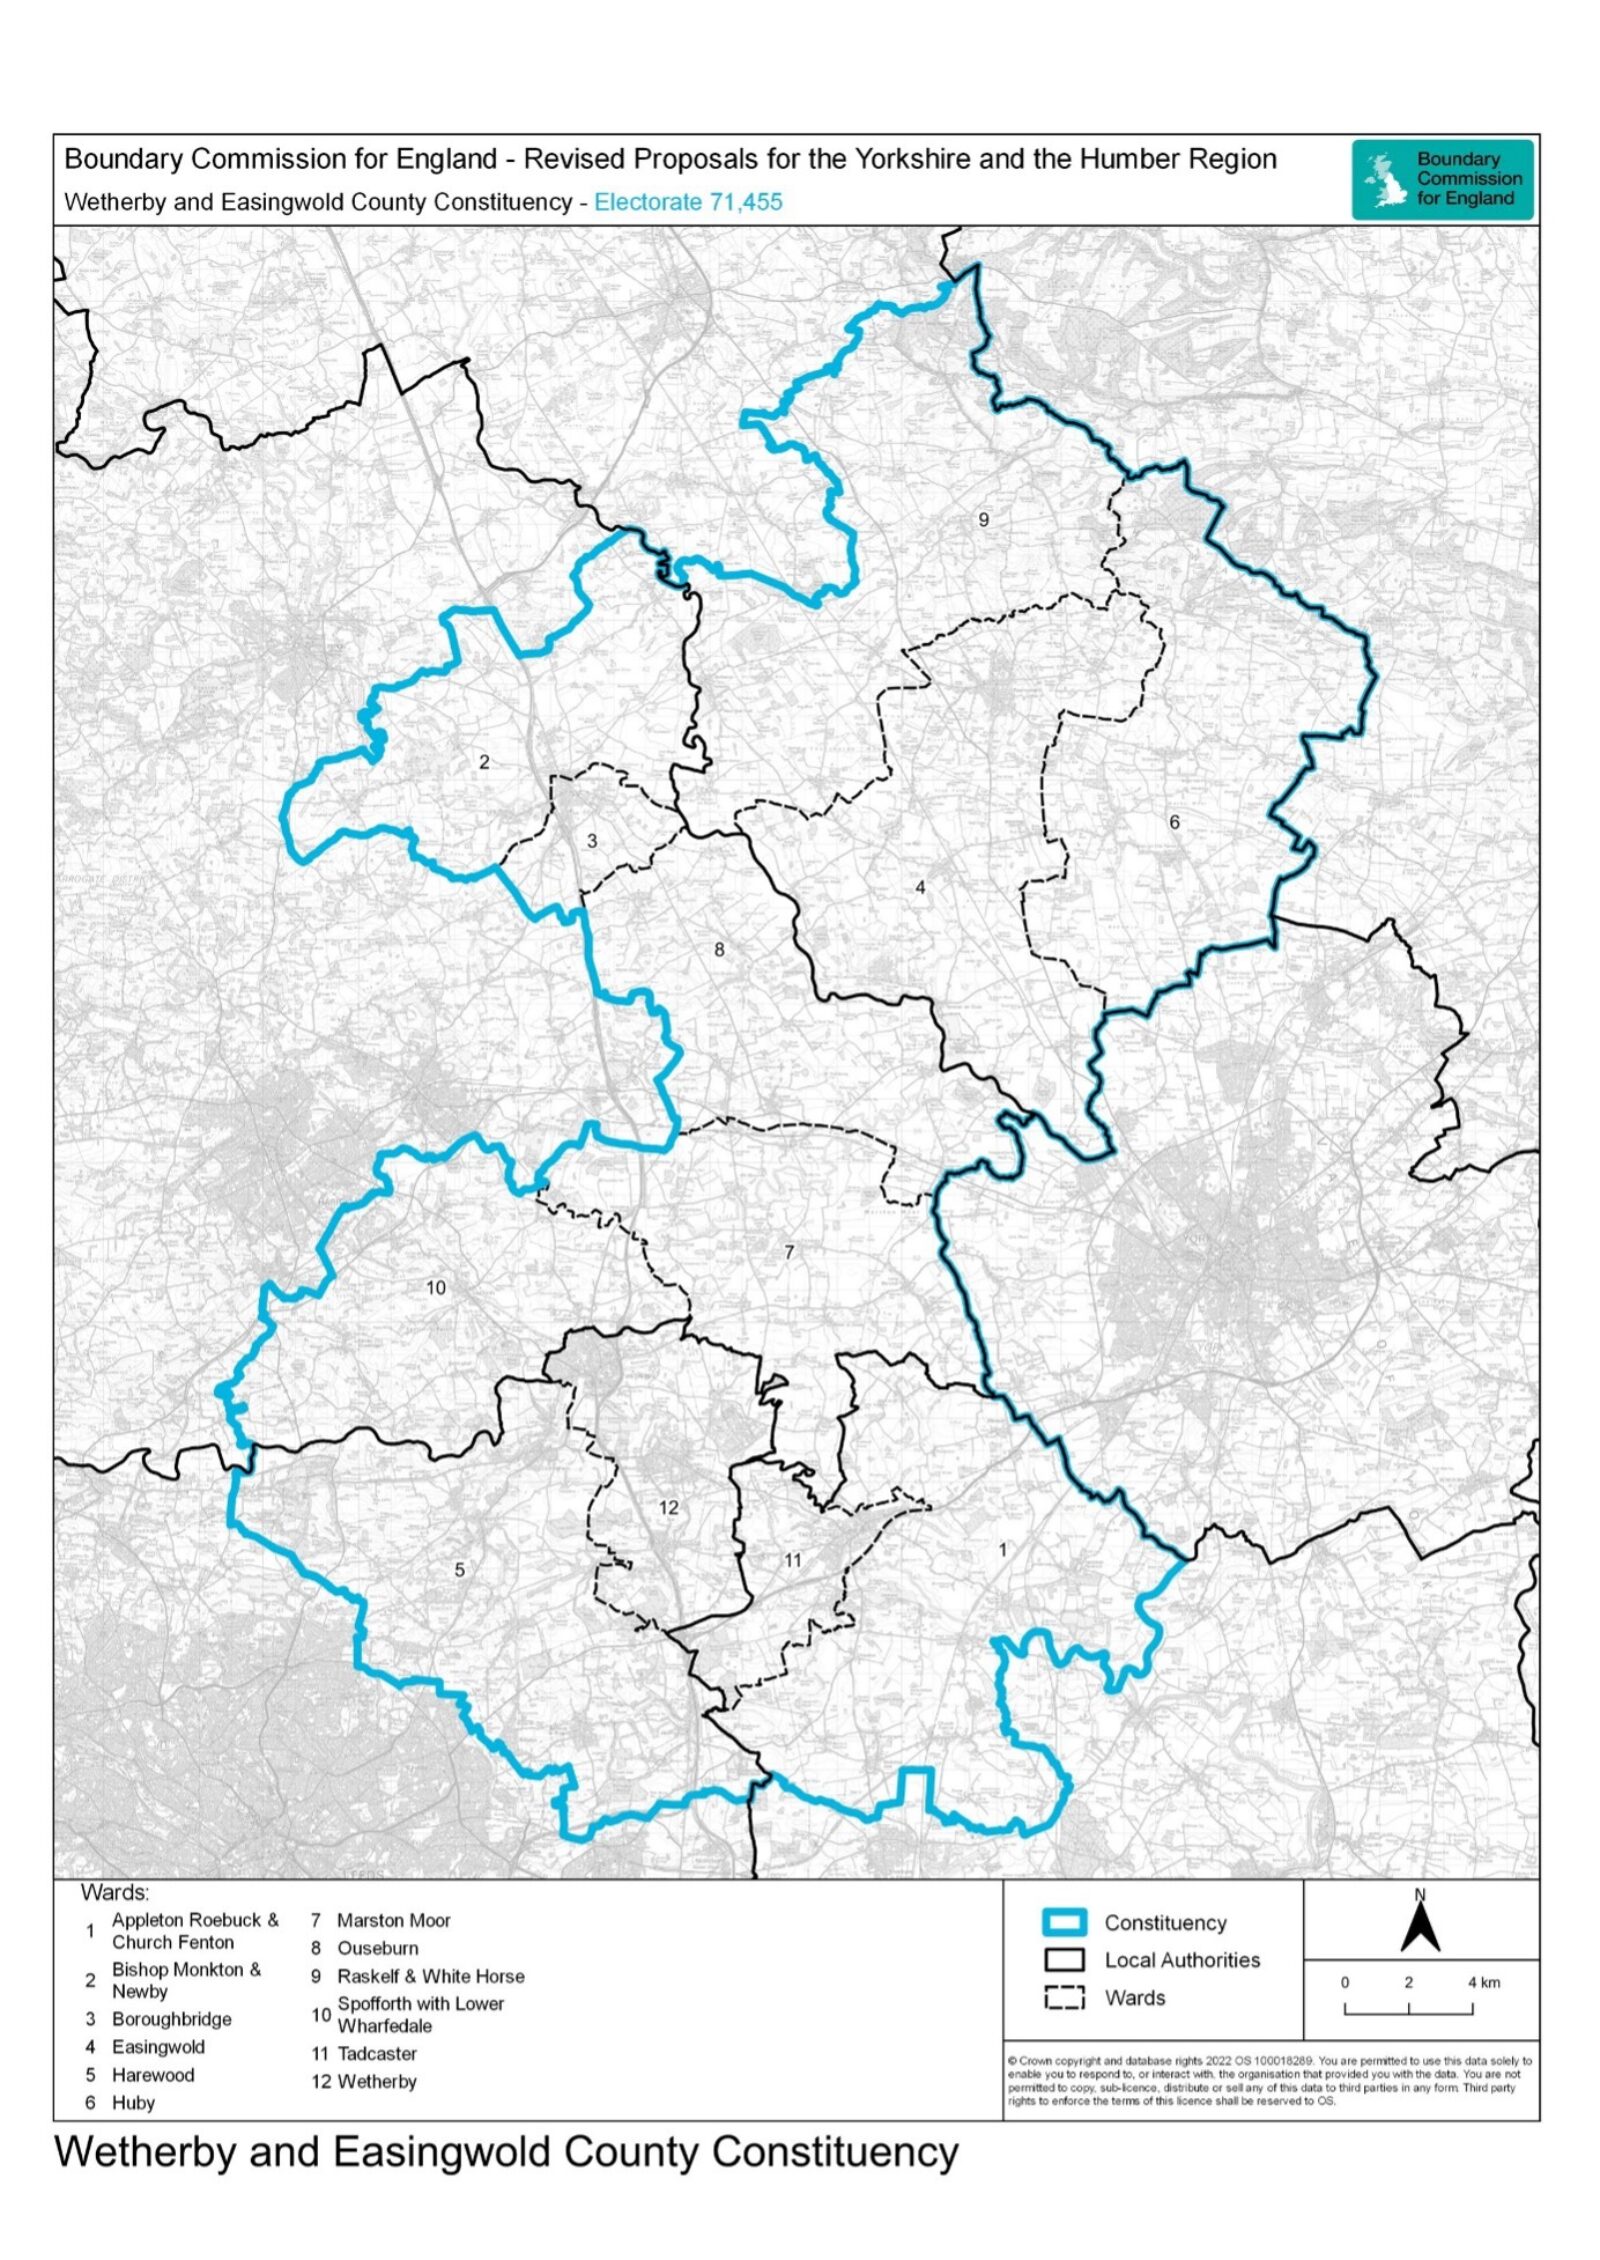 A map of the Wetherby and Easingwold constituency